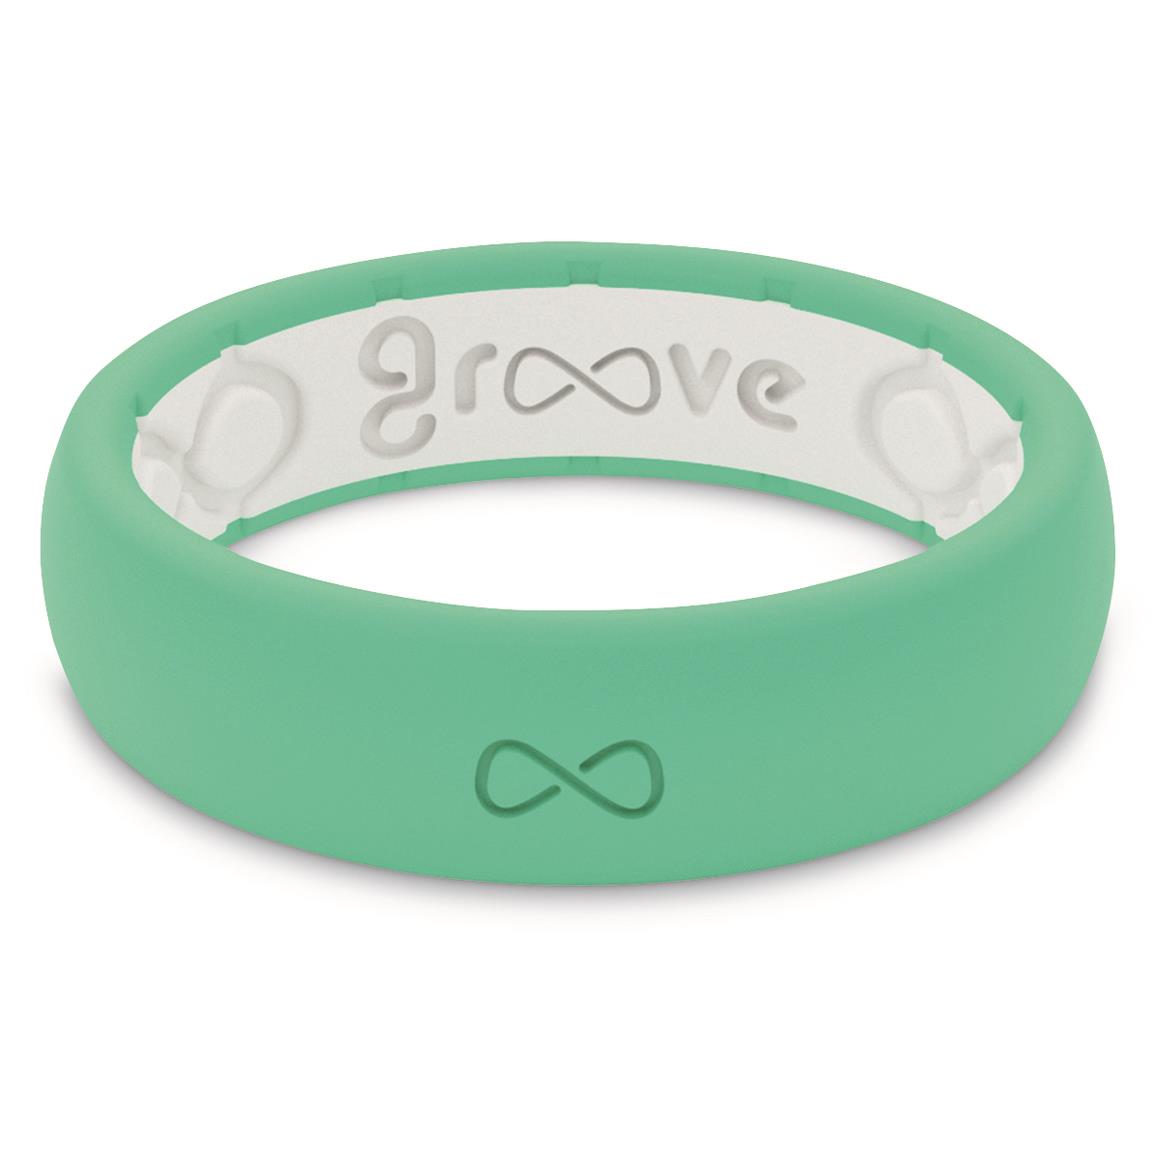 Groove Life Thin Solid Women's Silicone Ring, Seafoam/white